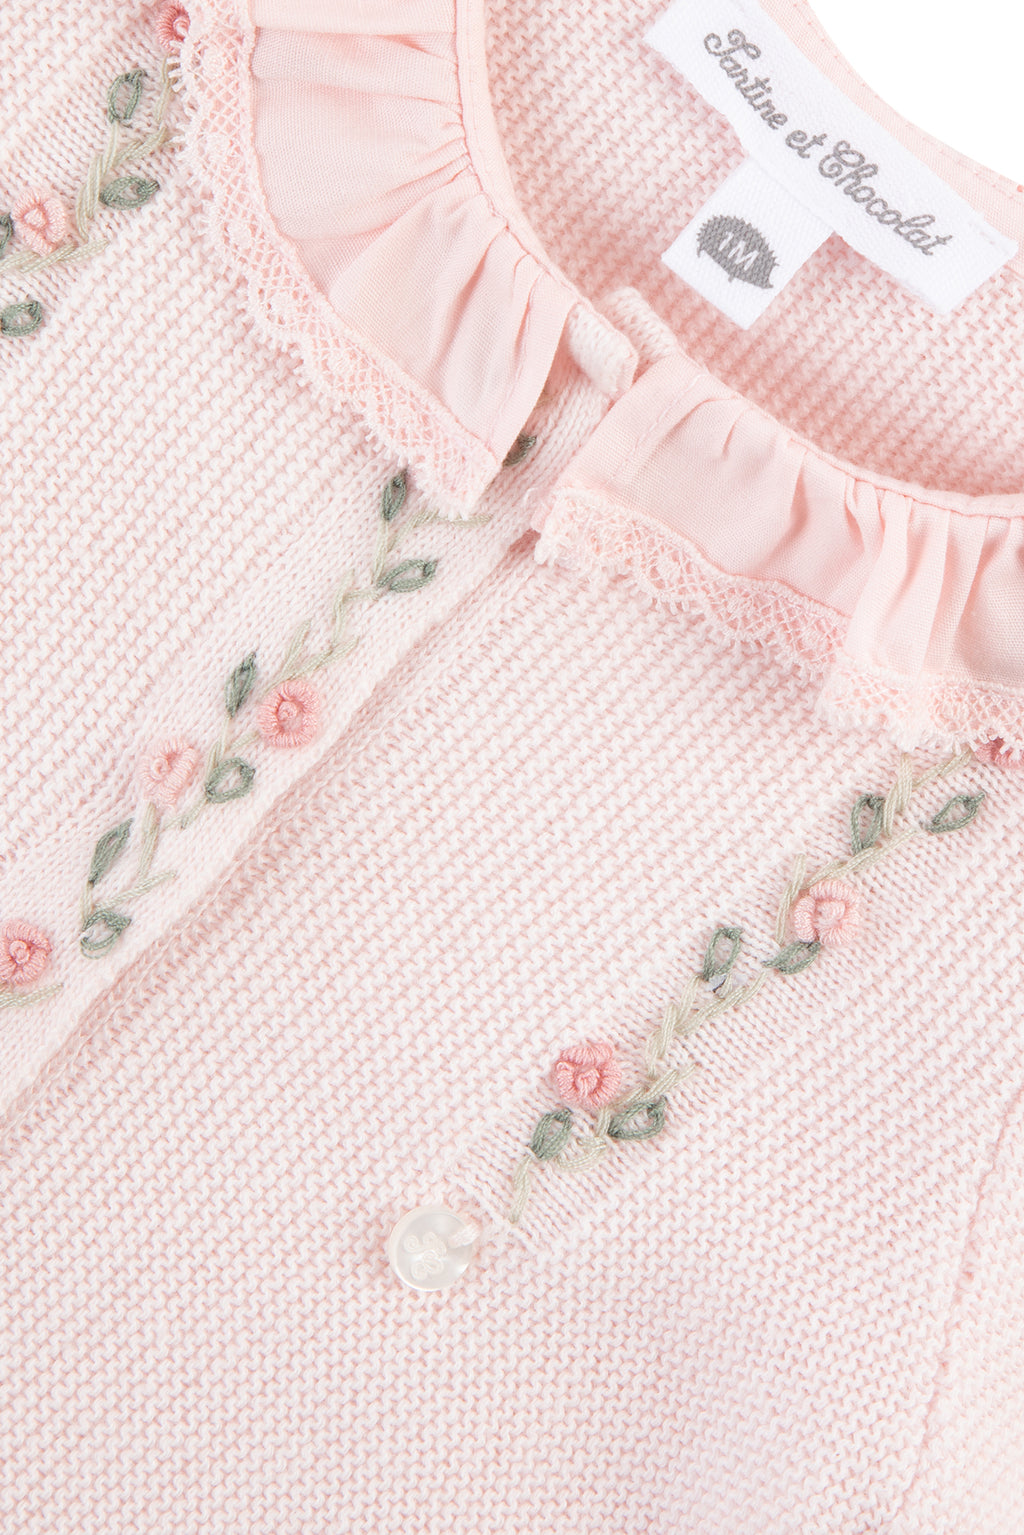 Jumpsuit long - Pale pink embroidery